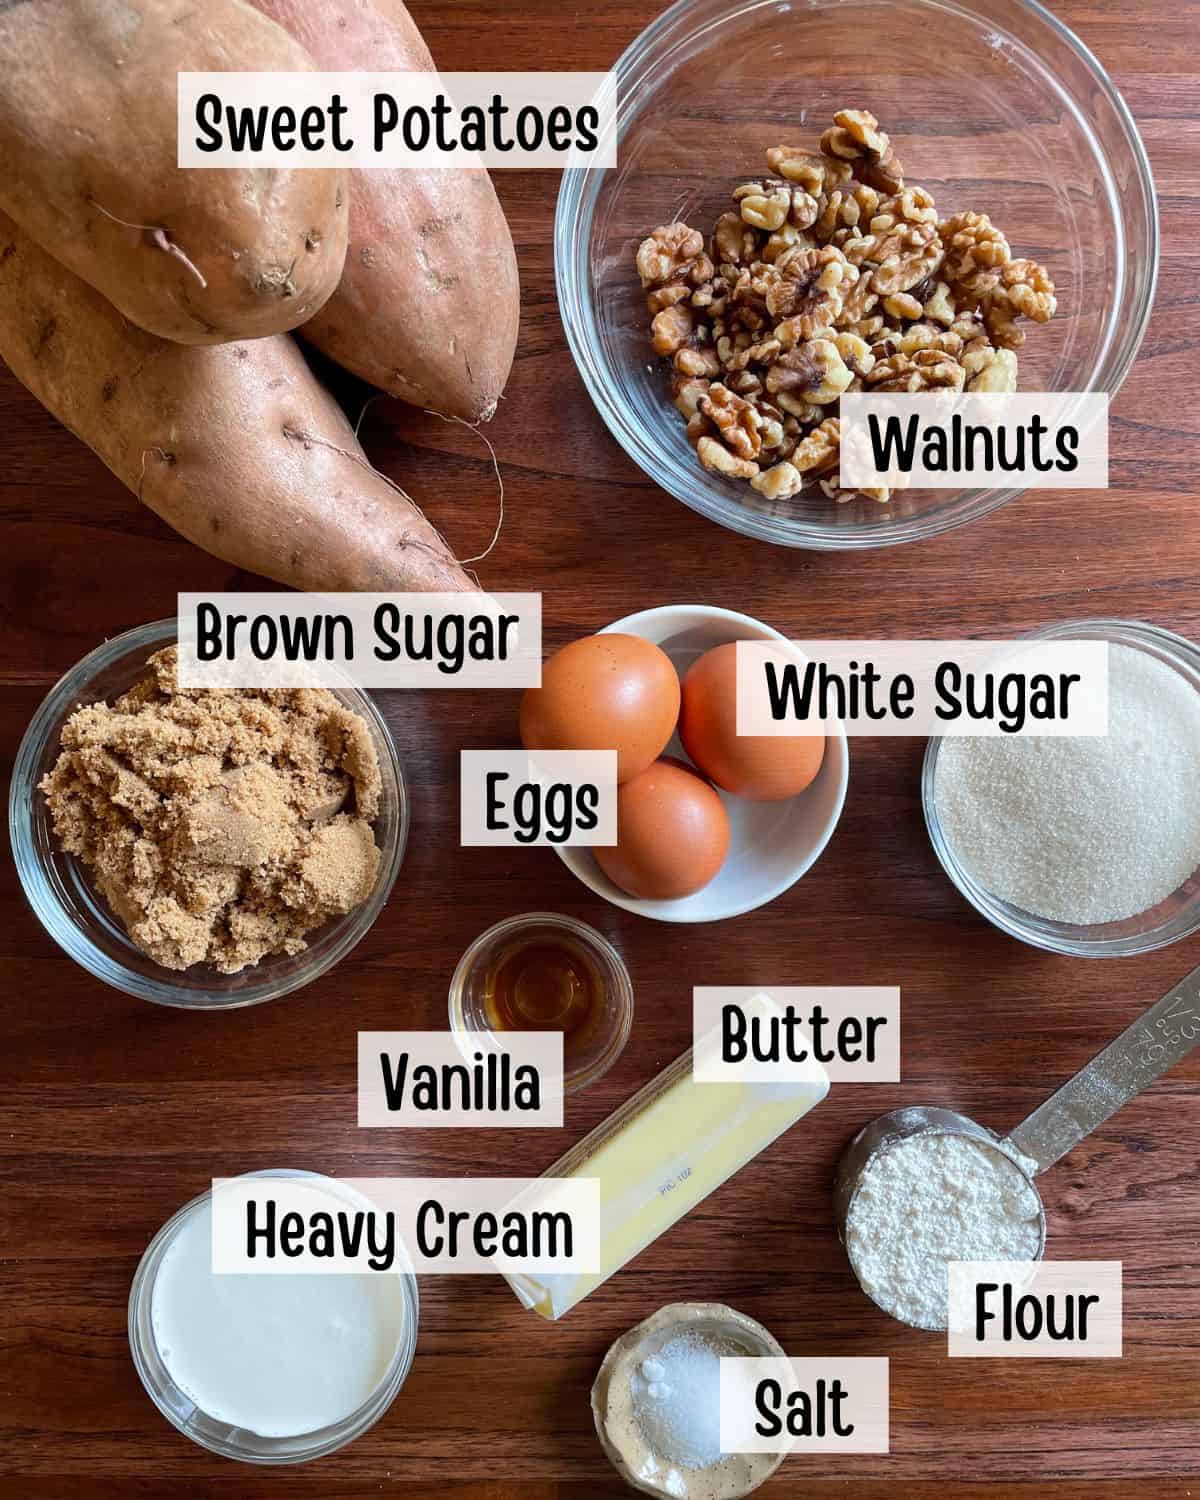 Ingredients needed to make a sweet potato casserole with walnut brown sugar topping.